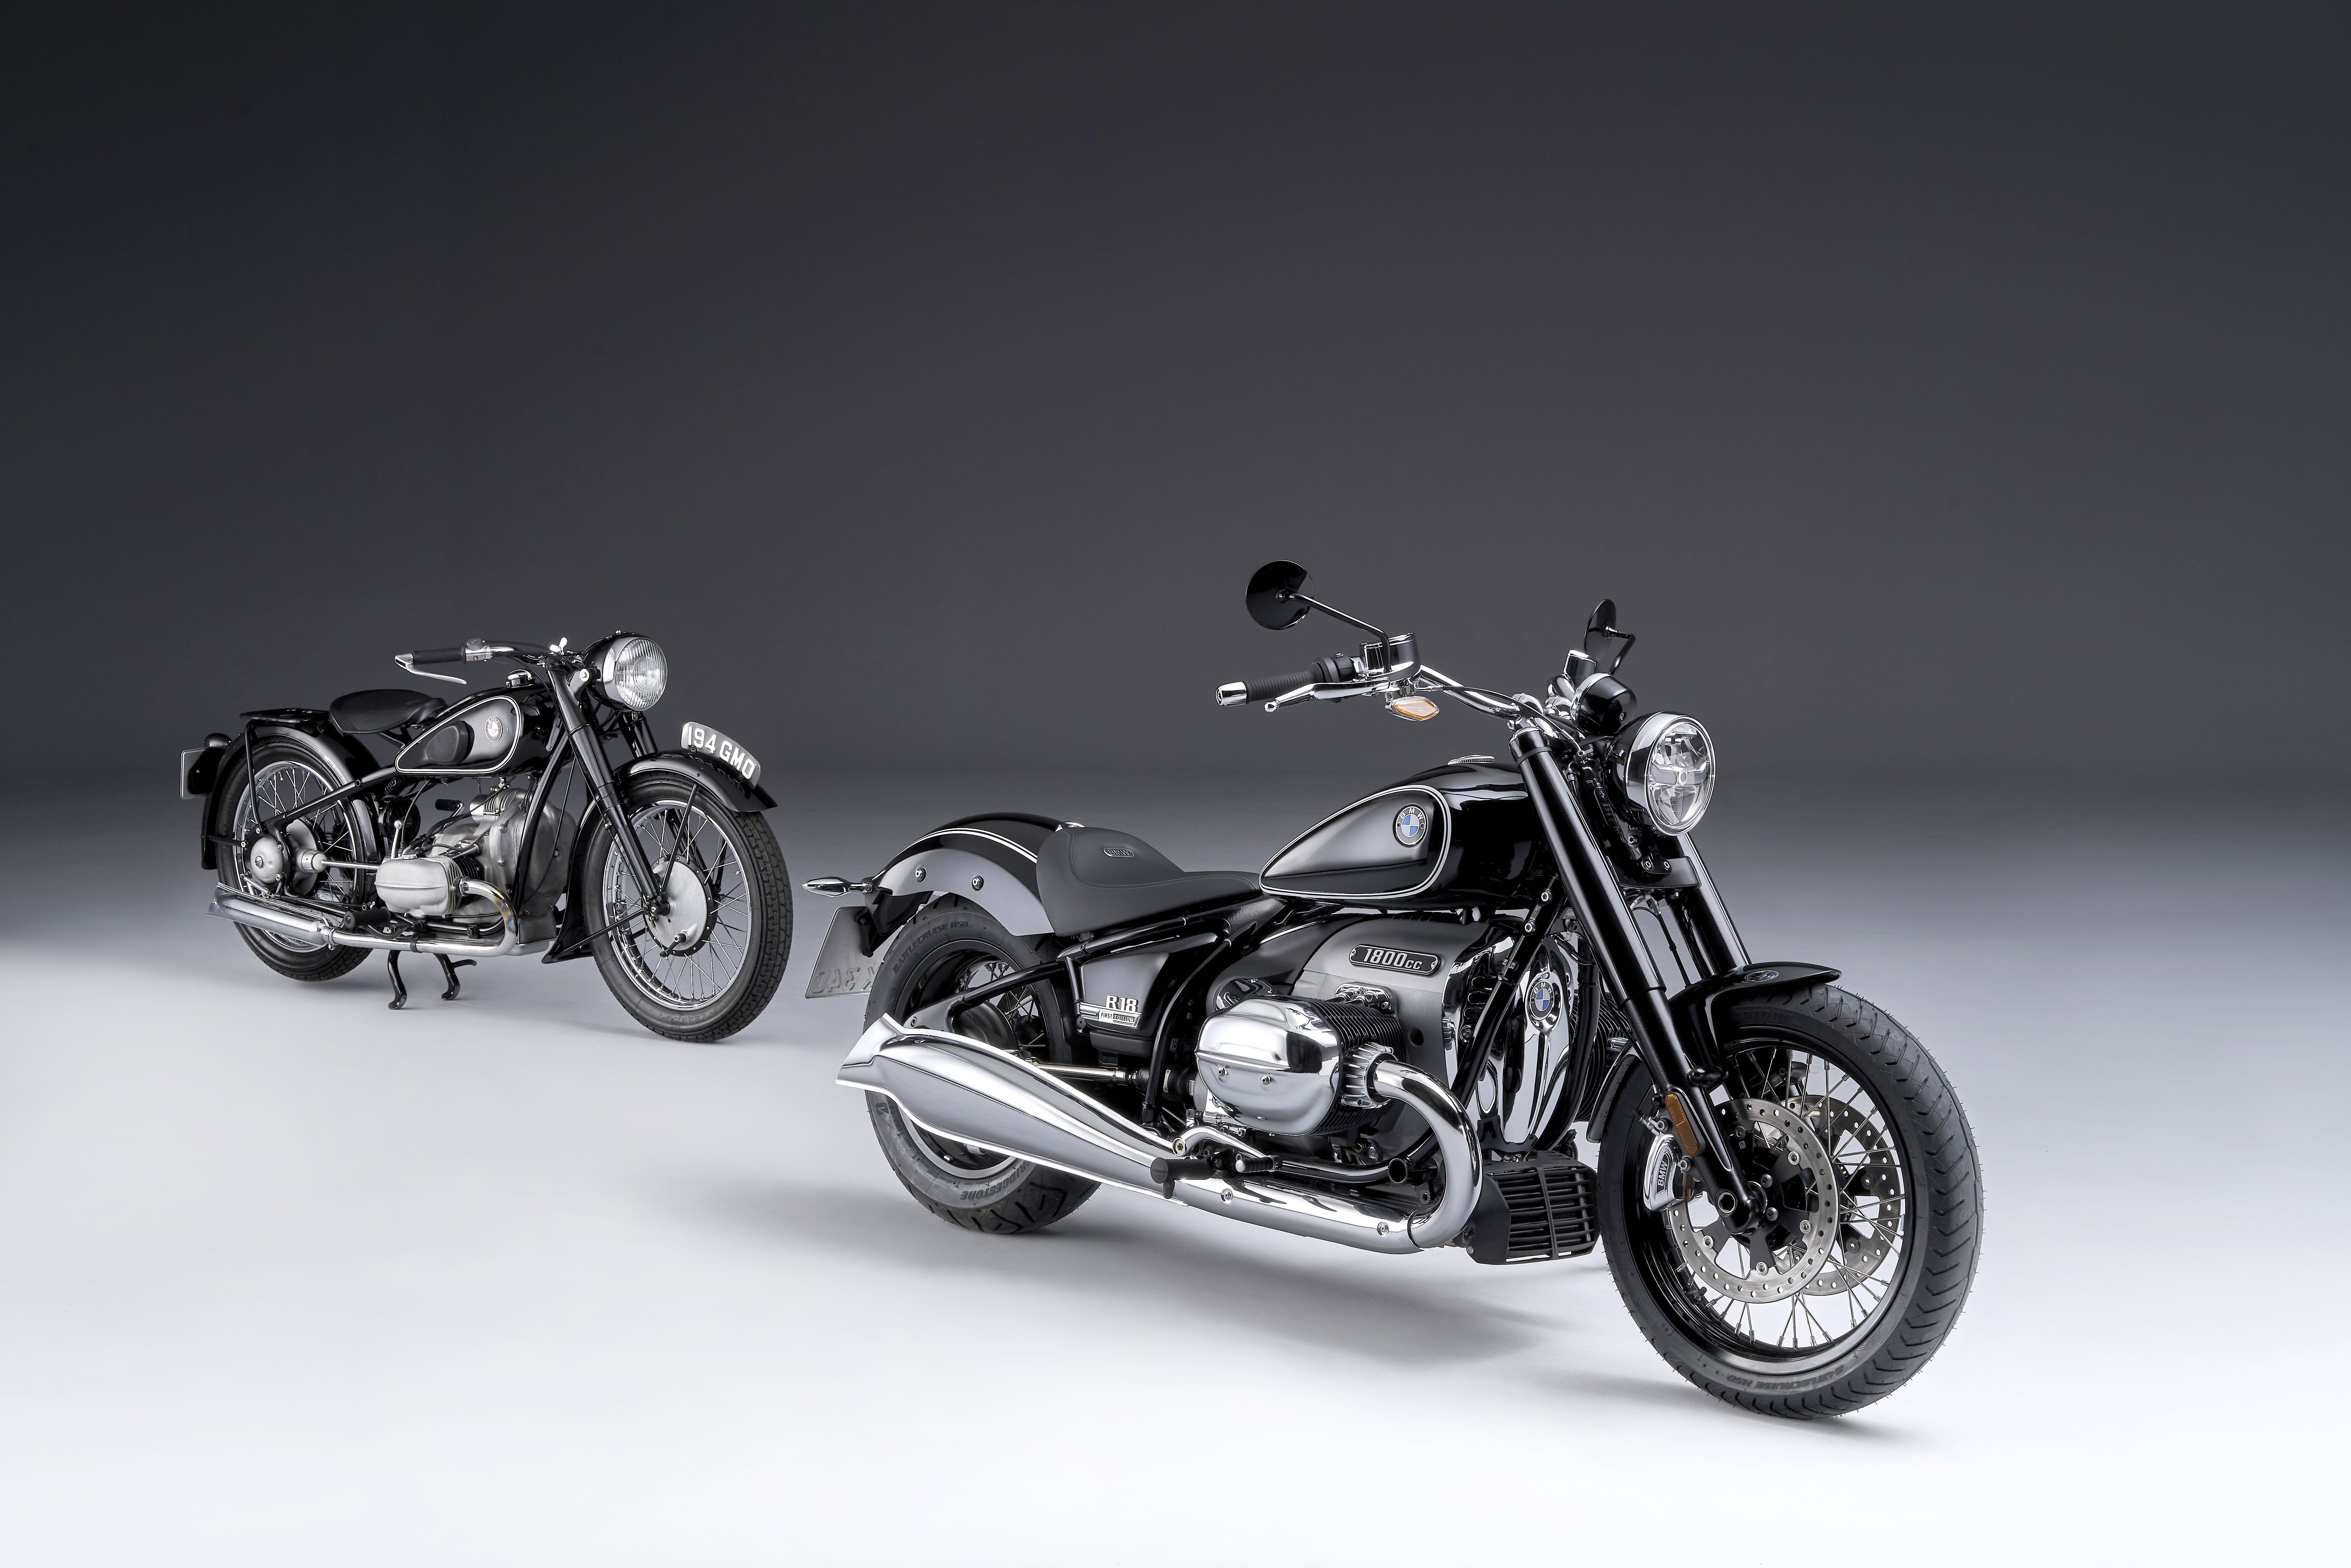 The New Bmw R 18 Cruiser Is A Gorgeous Hunk Of Retro Cool